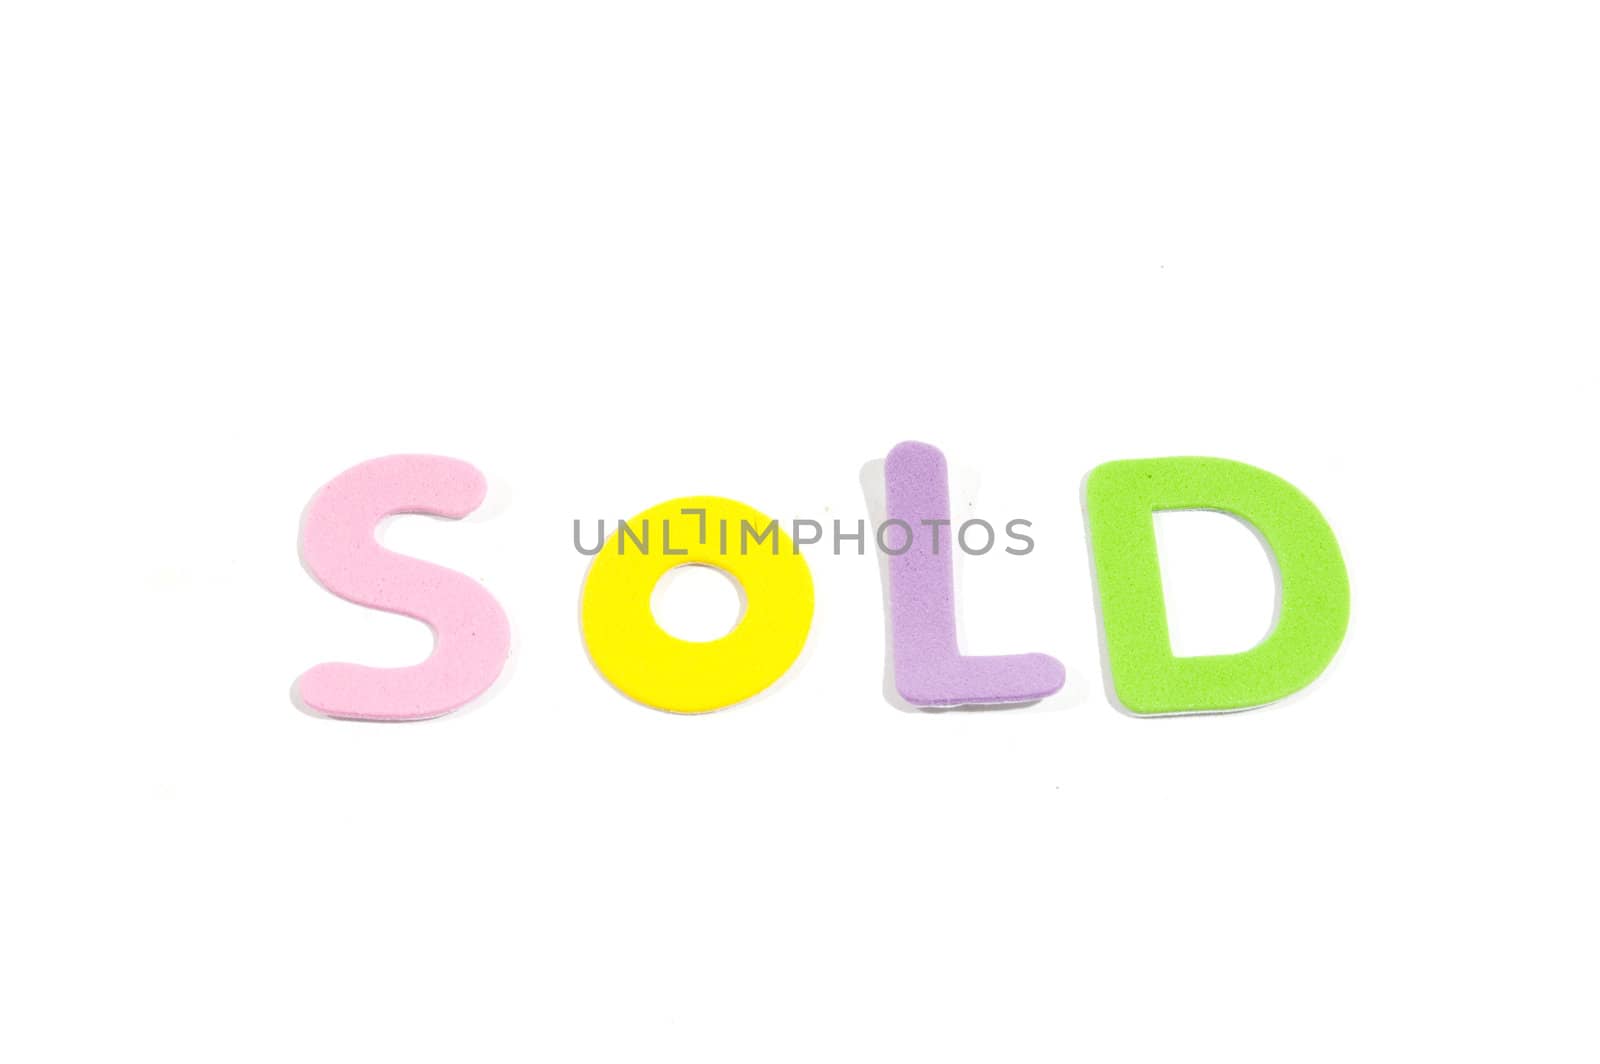 sold in colorfull letters isolated on white